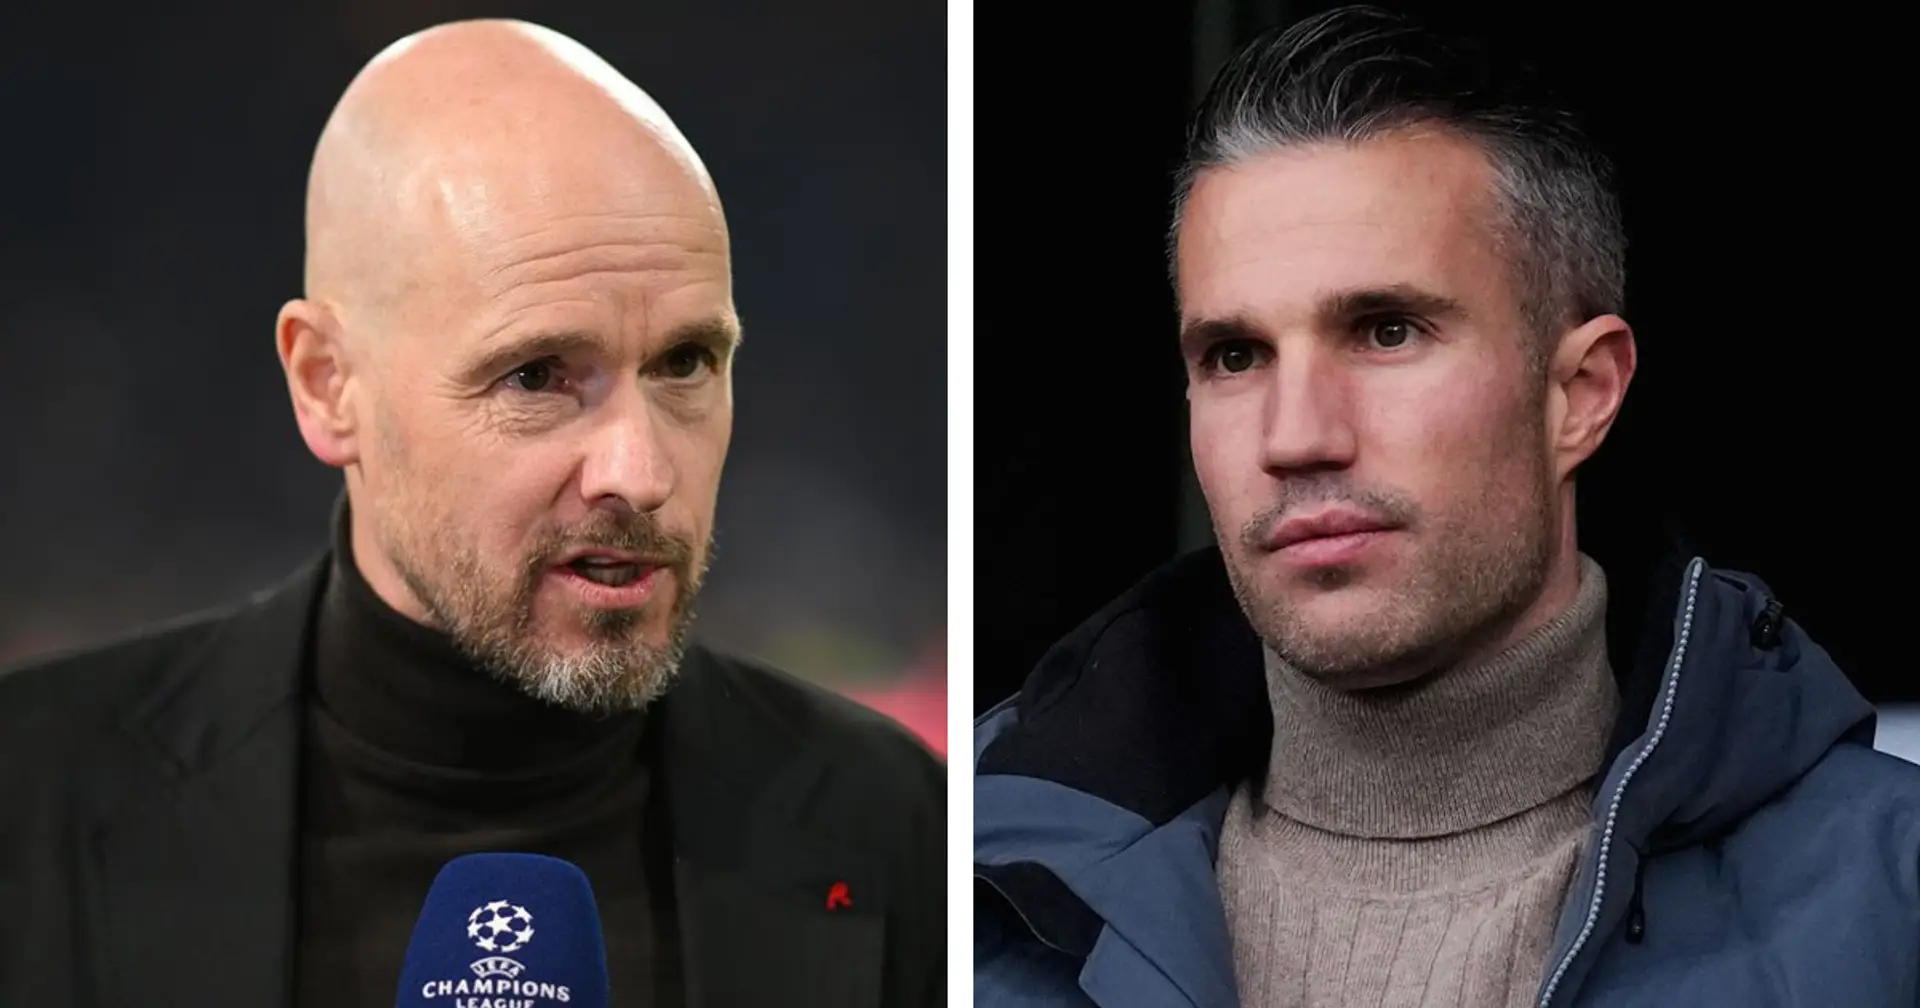 Ten Hag 'has spoken to Van Persie' about assistant coach role if he takes over at Man United